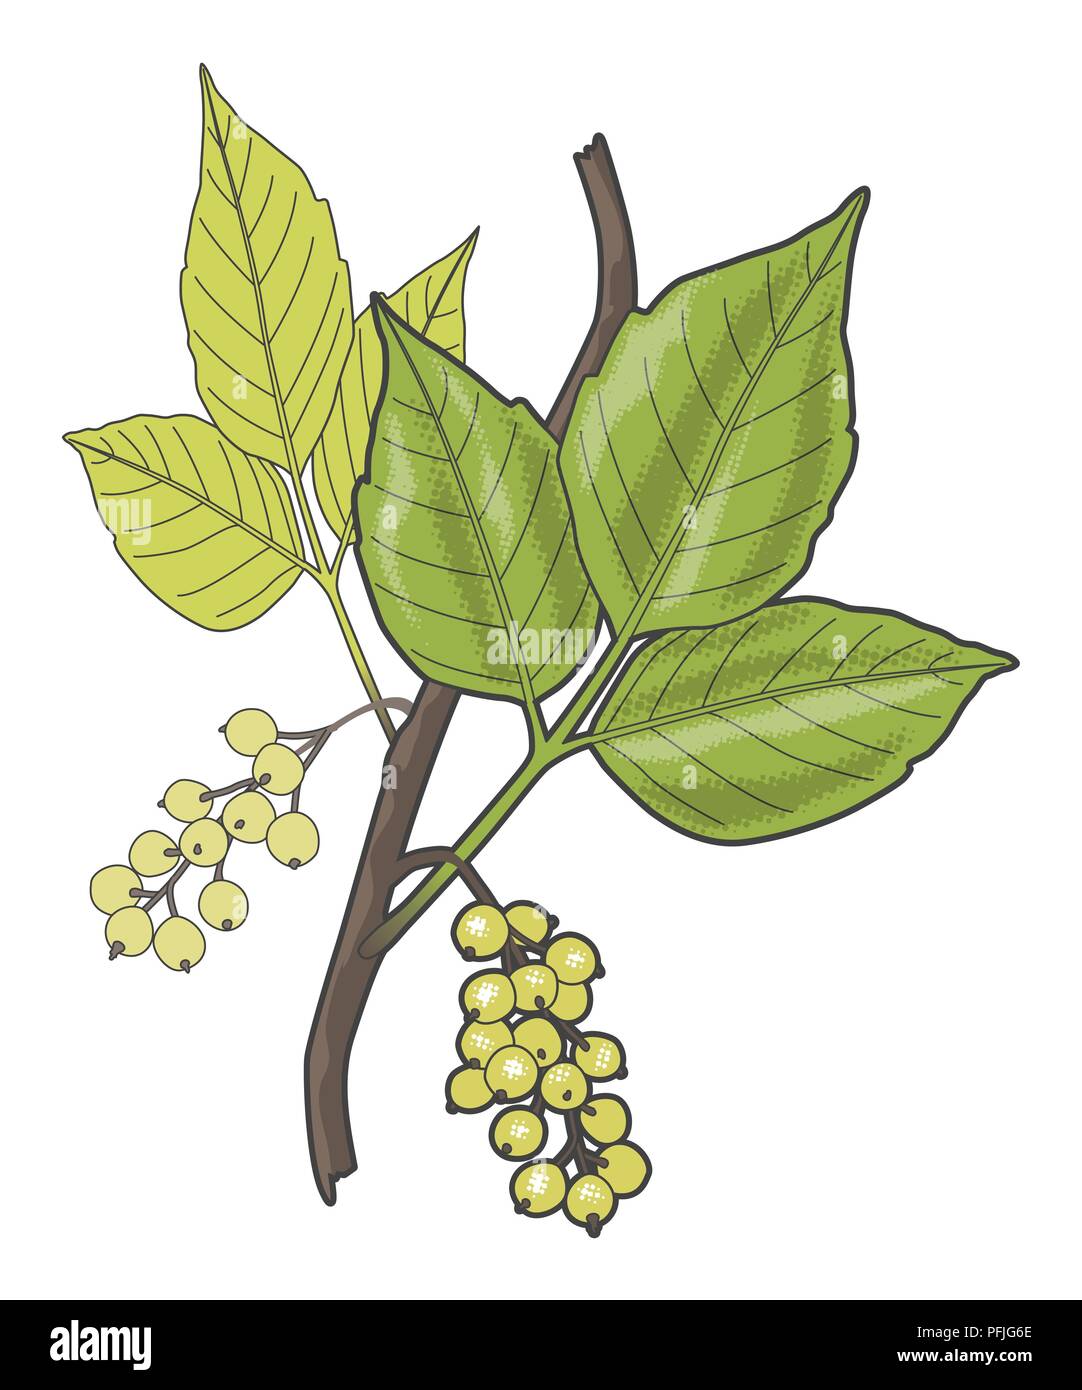 Digital illustration of Toxicodendron radicans (Poison ivy), green leaves and berries on stem Stock Photo